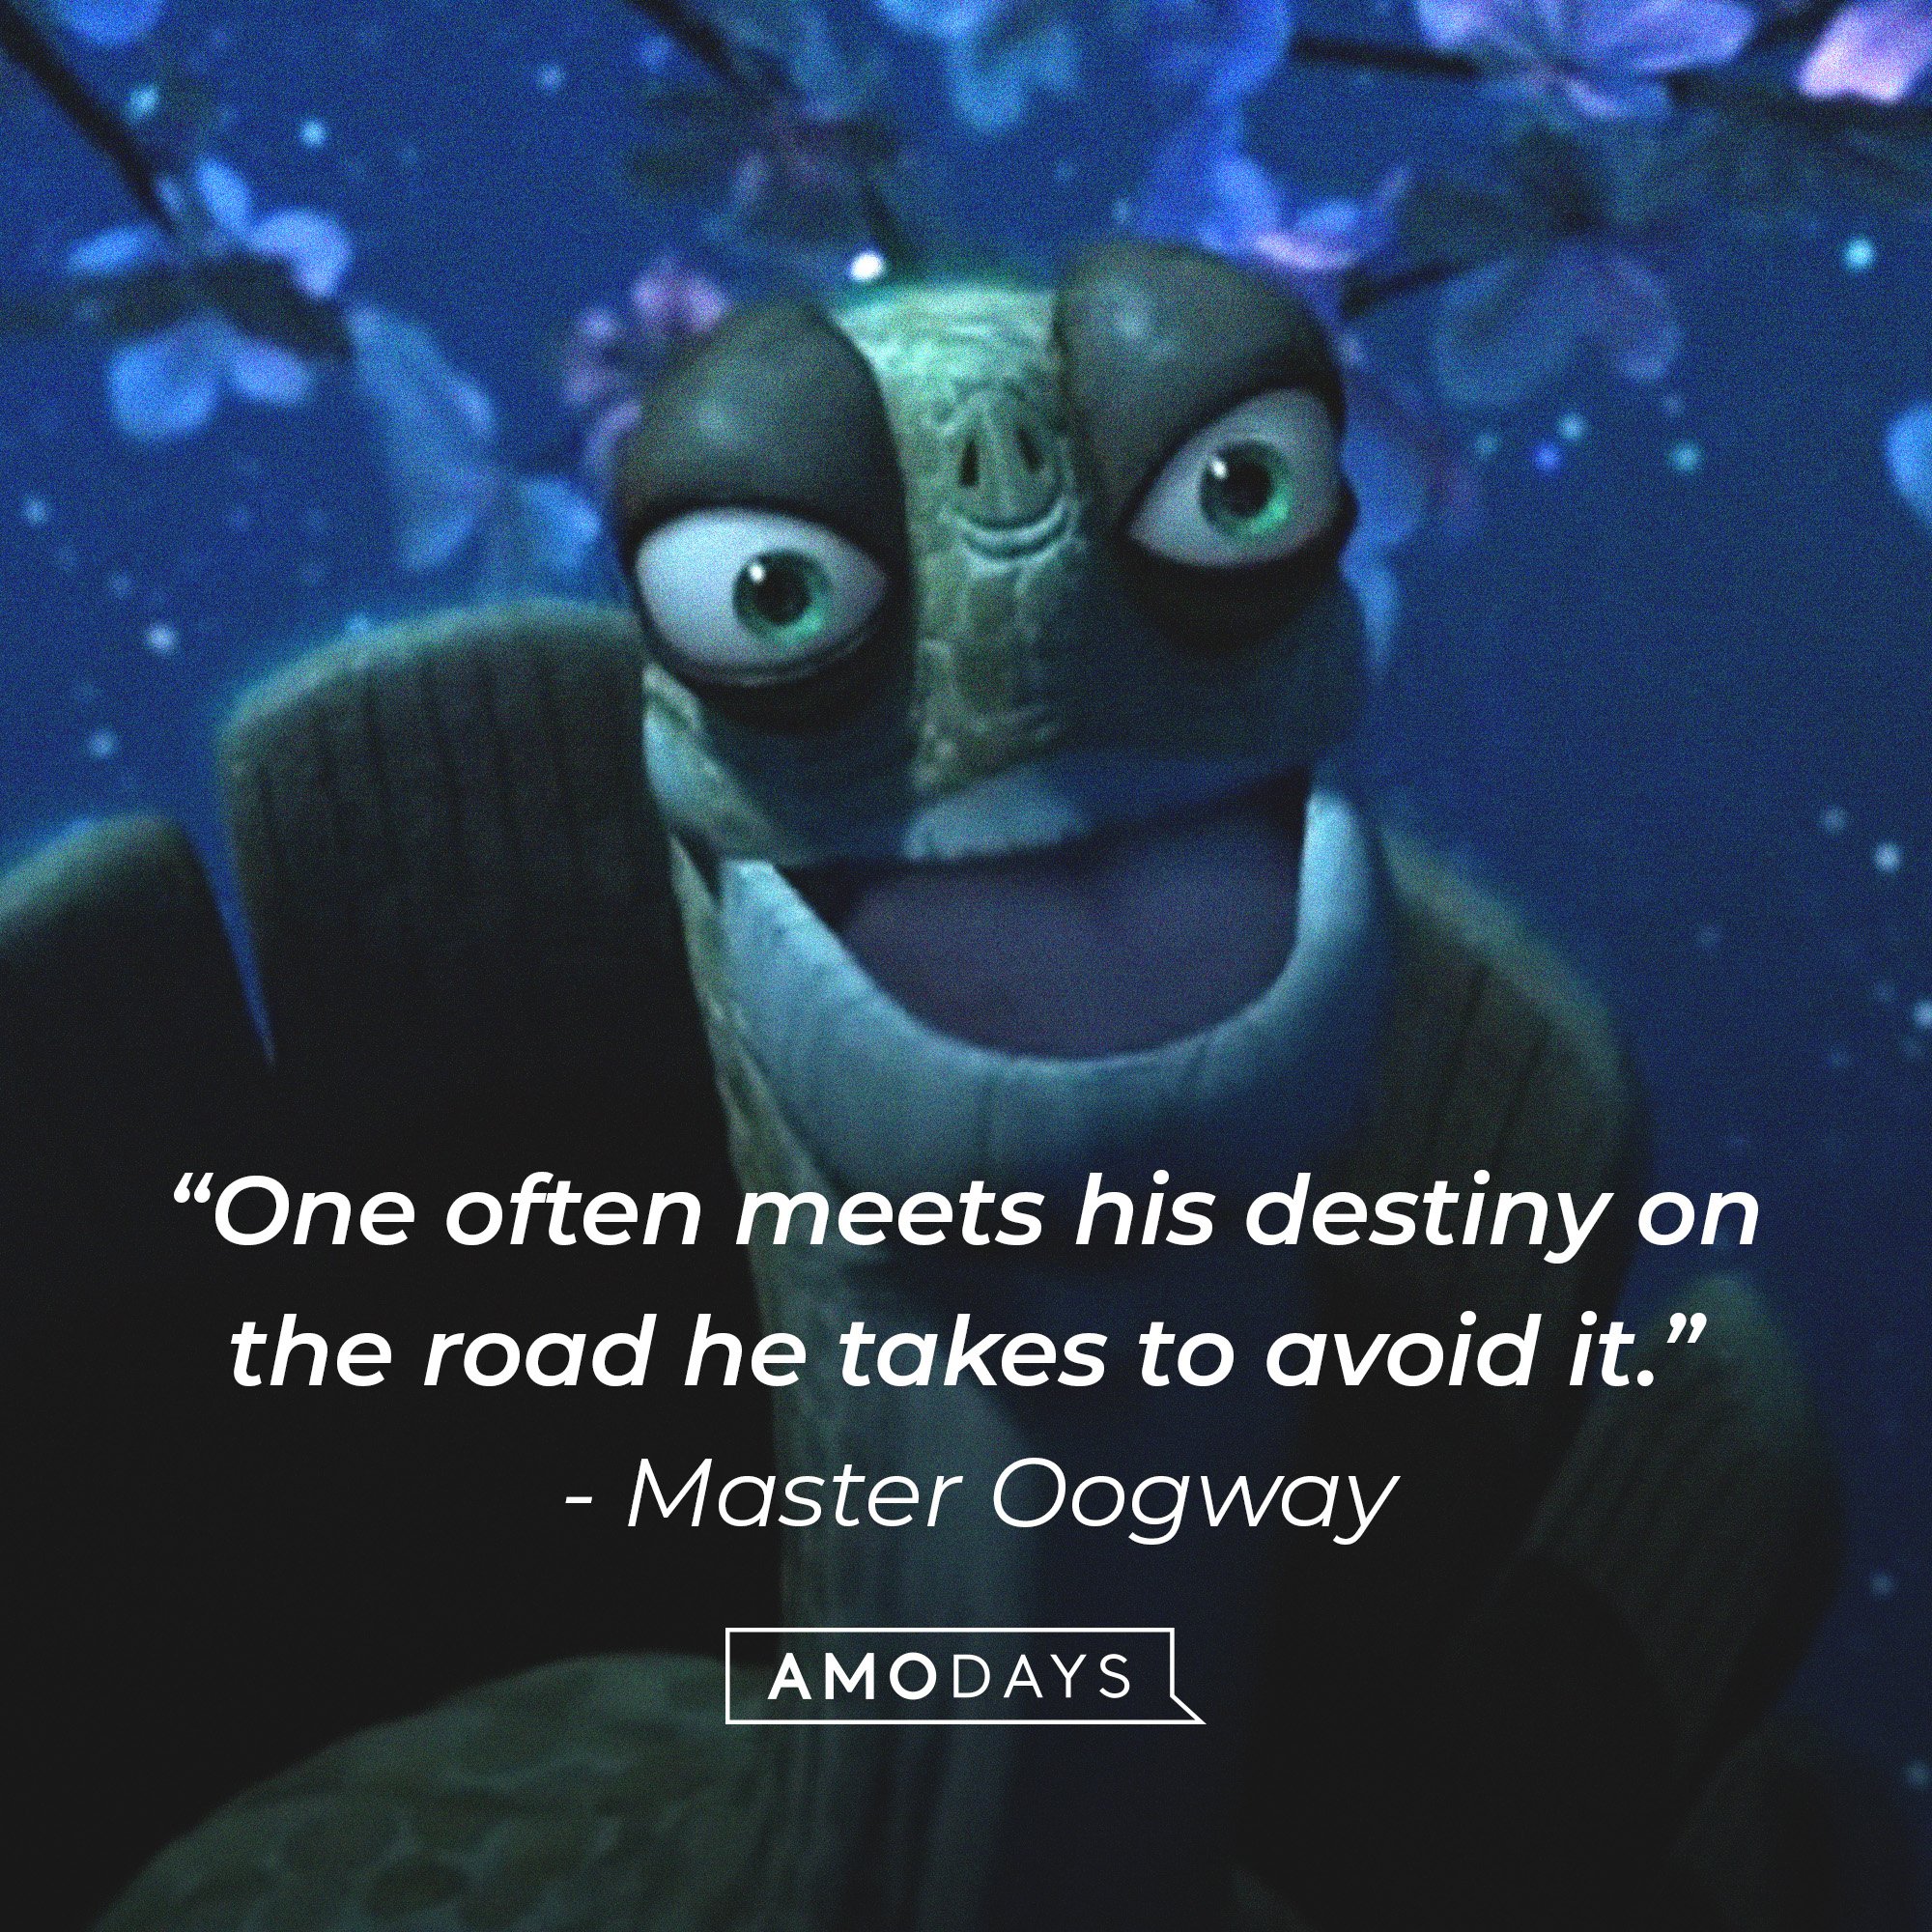 Master Oogway’s quote: “One often meets his destiny on the road he takes to avoid it.” | Image: AmoDays